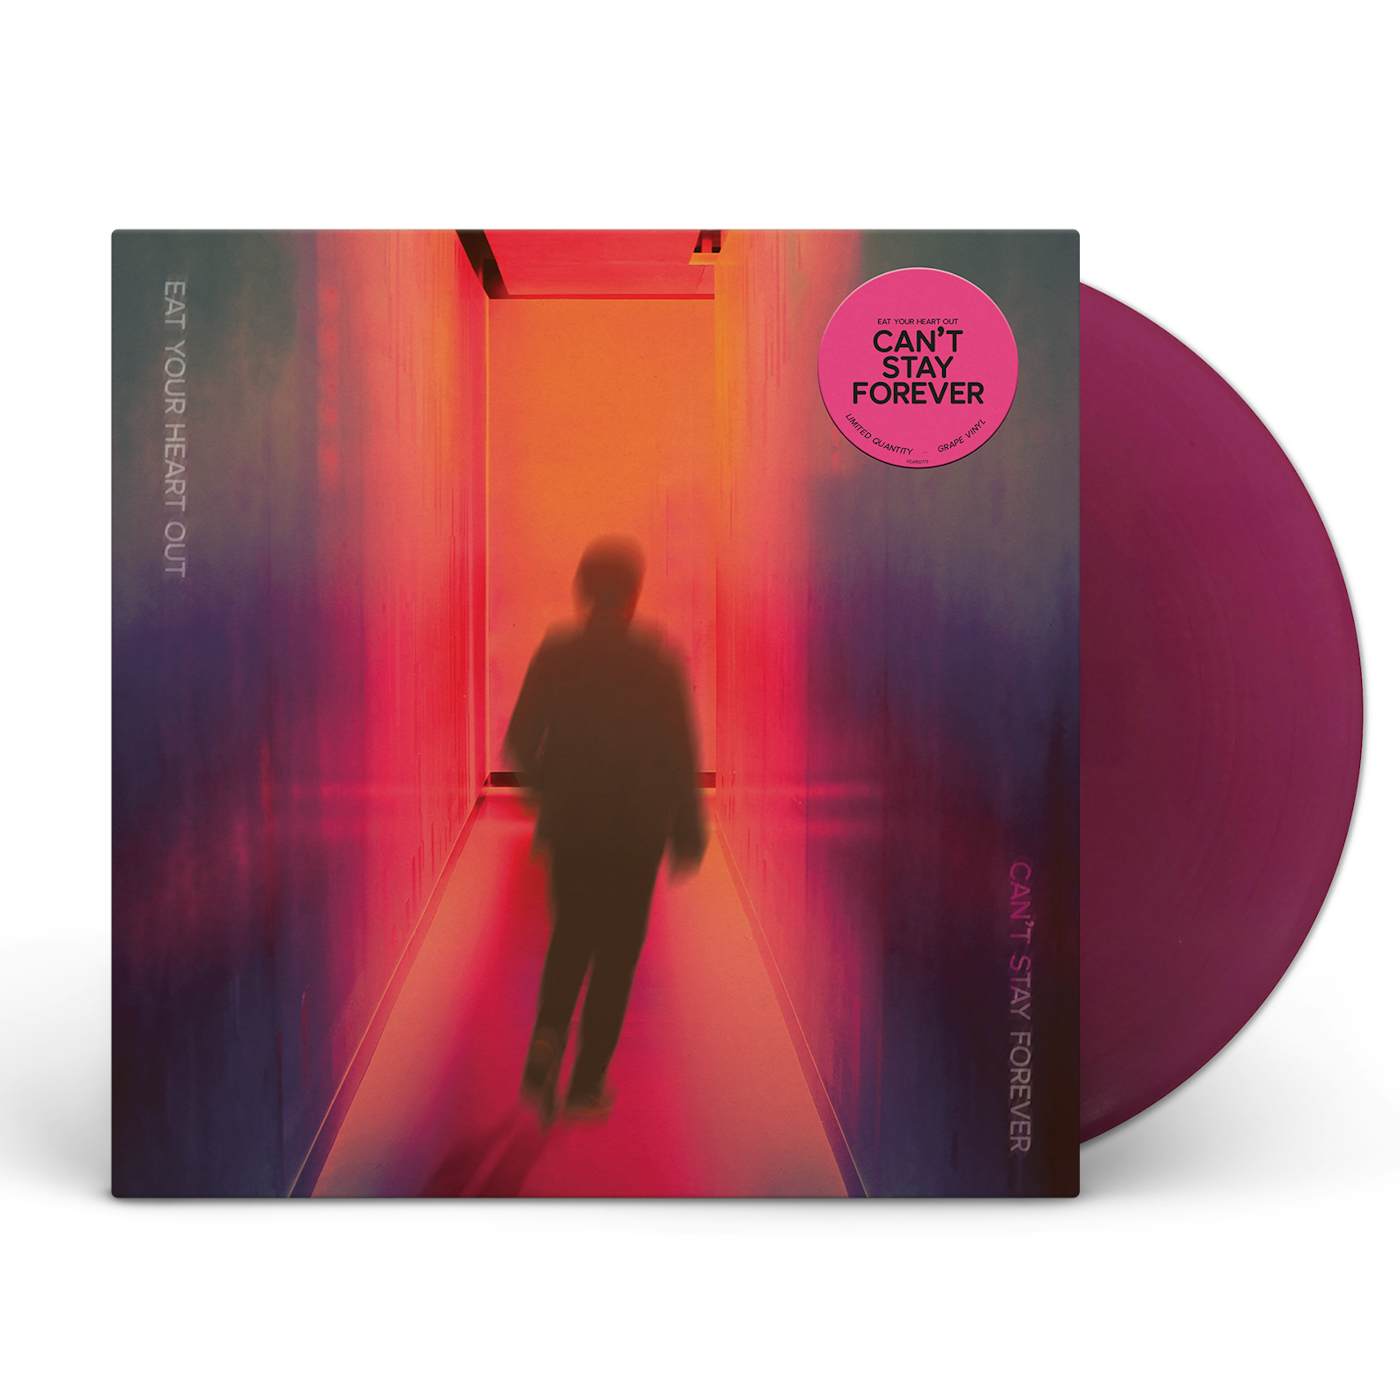 Eat Your Heart Out "Can't Stay Forever" Grape Vinyl